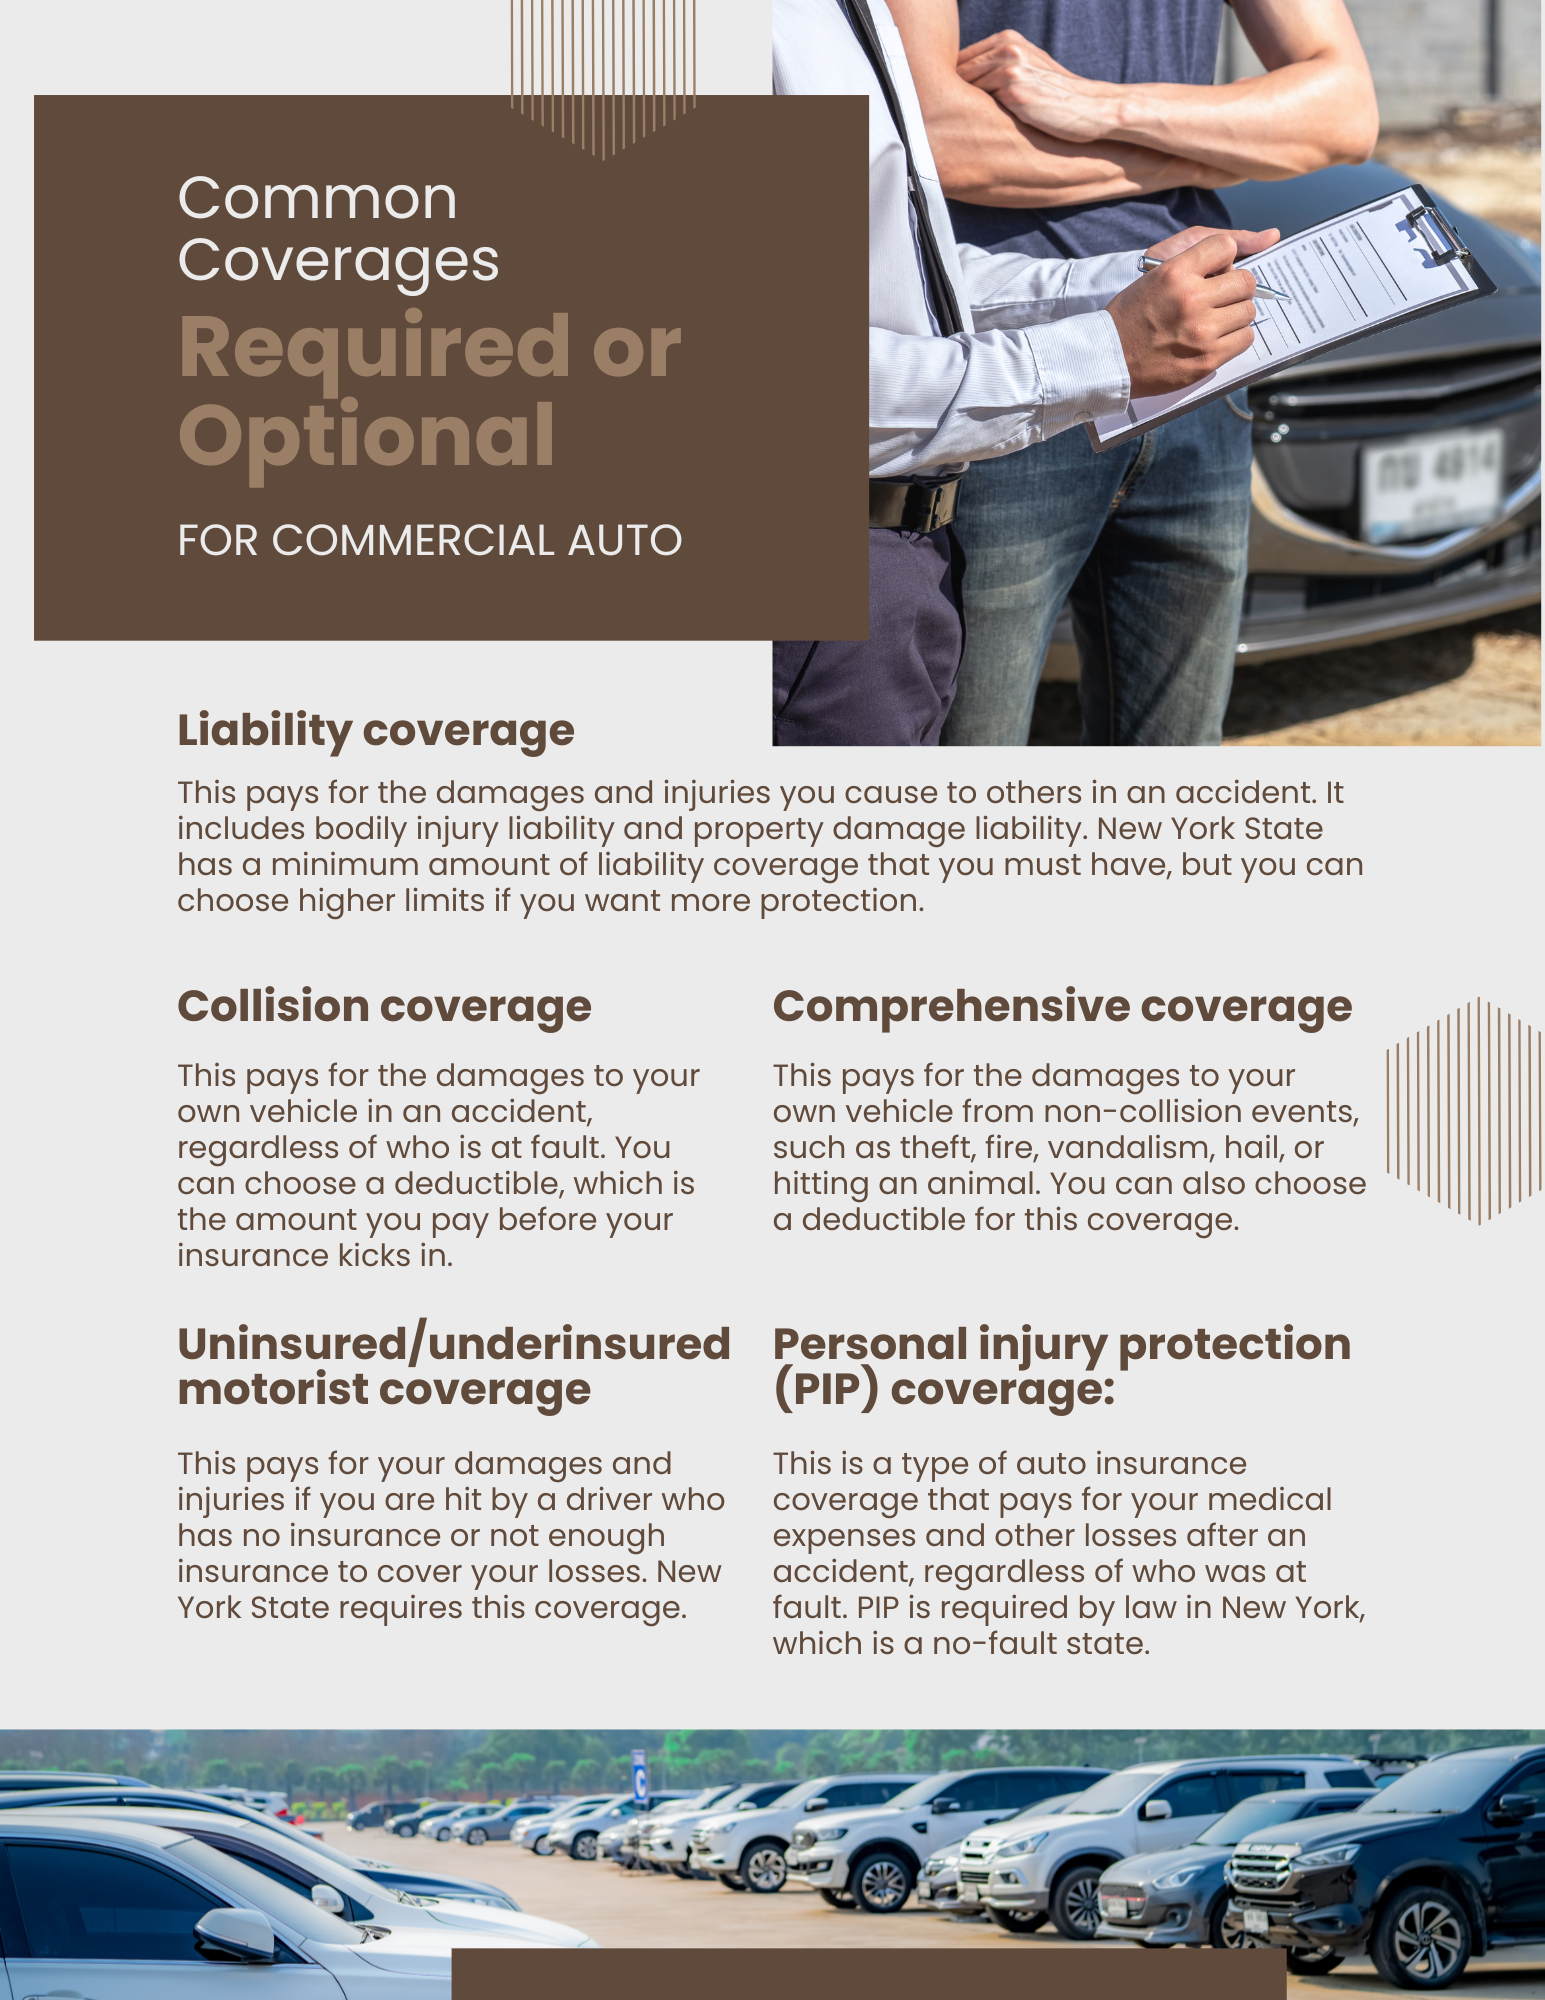 Common commercial auto insurance coverages for New York State